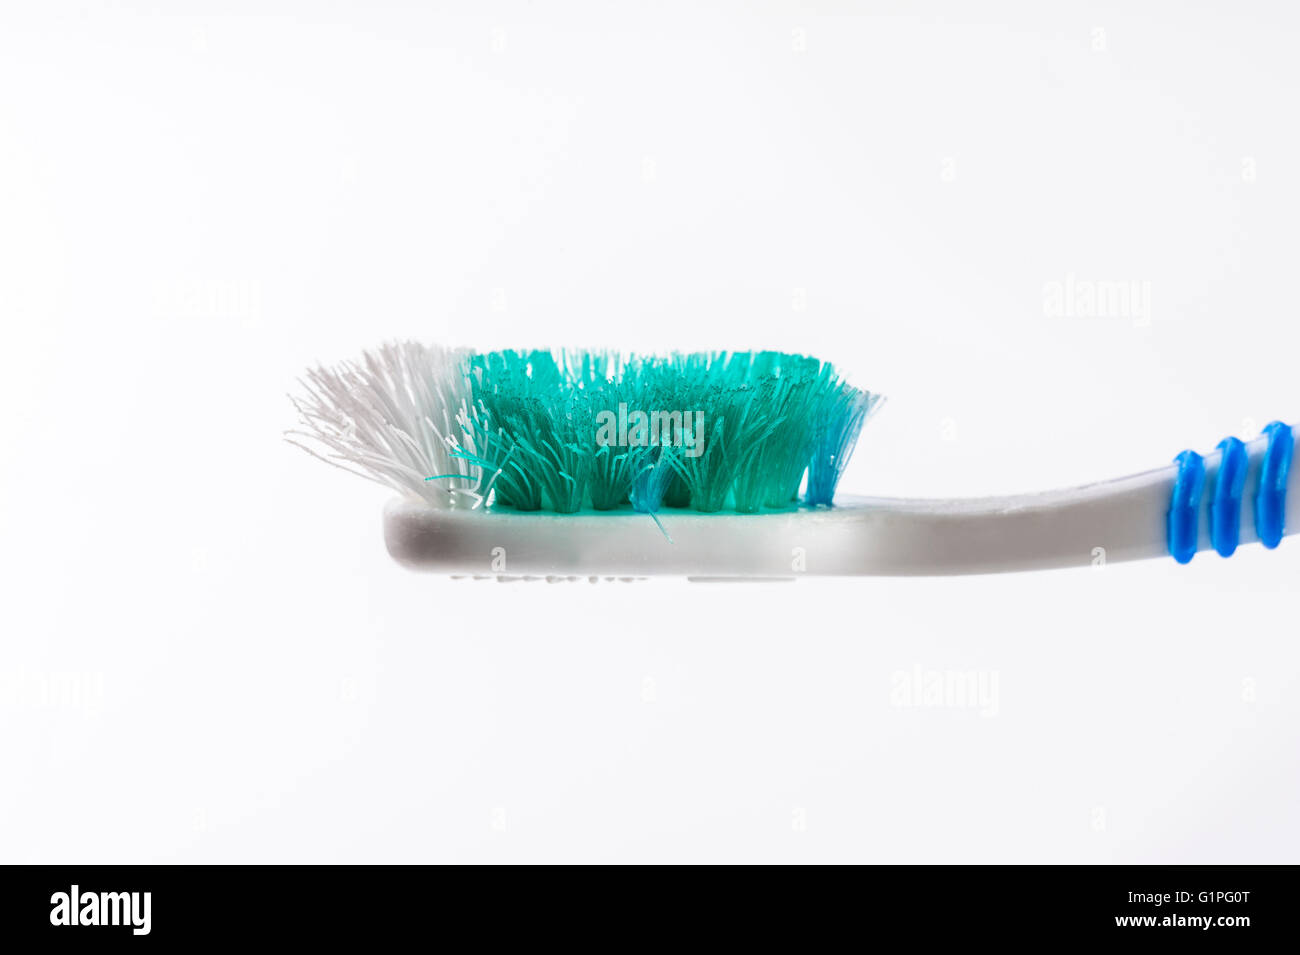 Head of an old worn out toothbrush. Stock Photo